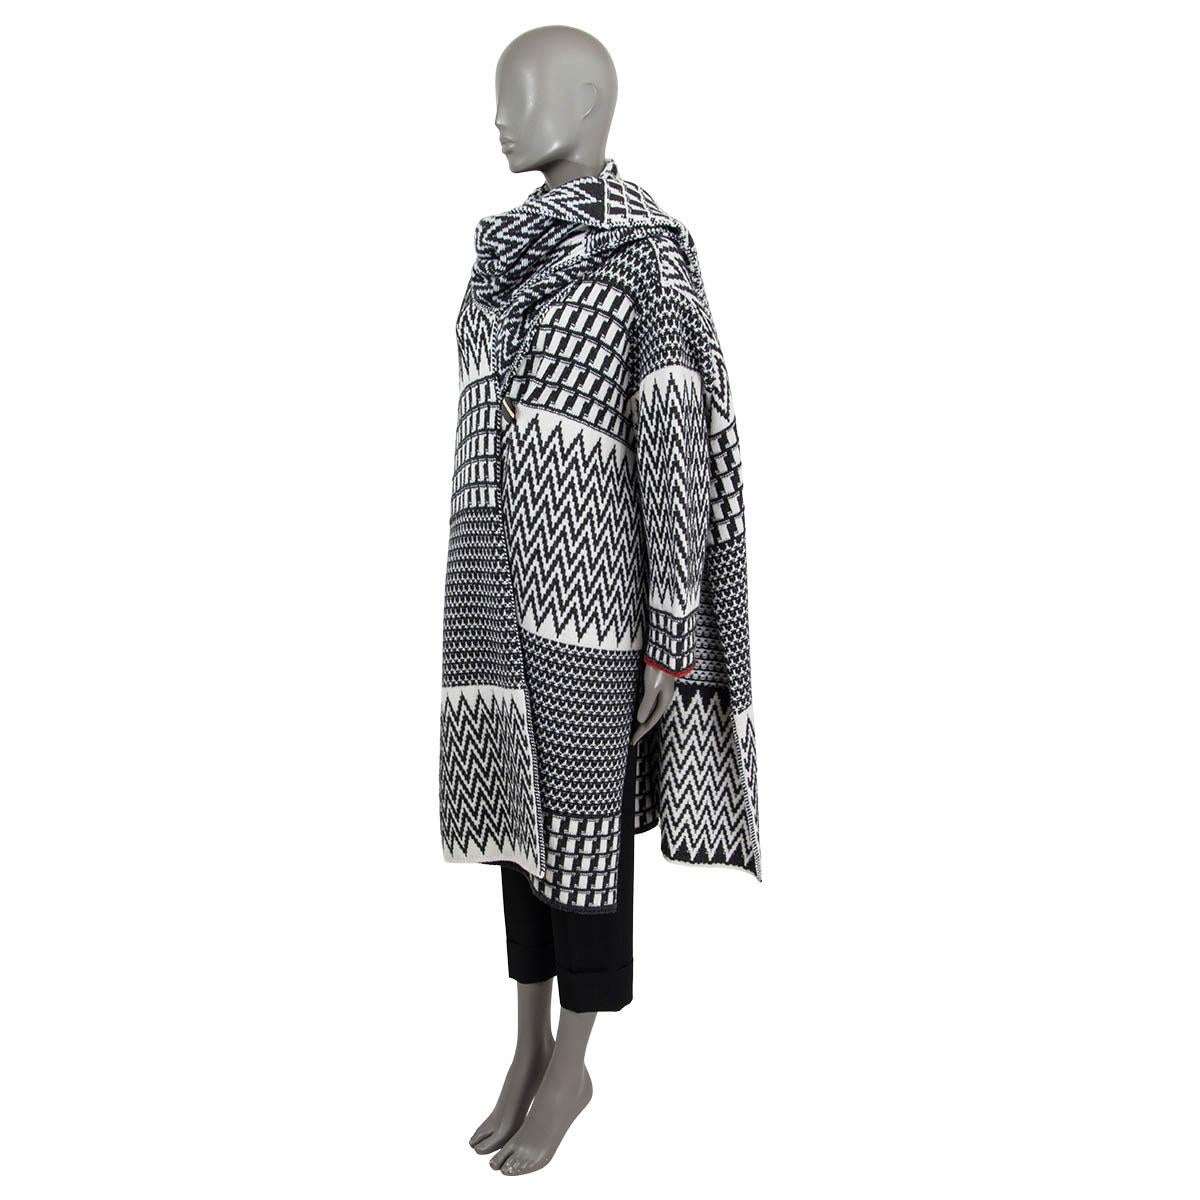 100% authentic Stella McCartney Pre-Fall 2020 zig zag jacquard knit cape coat in charcoal and off-white virgin wool (100%). Features side slits and and an orange trim. Opens with one button at the chest. Unlined. Has been worn once or twice and is